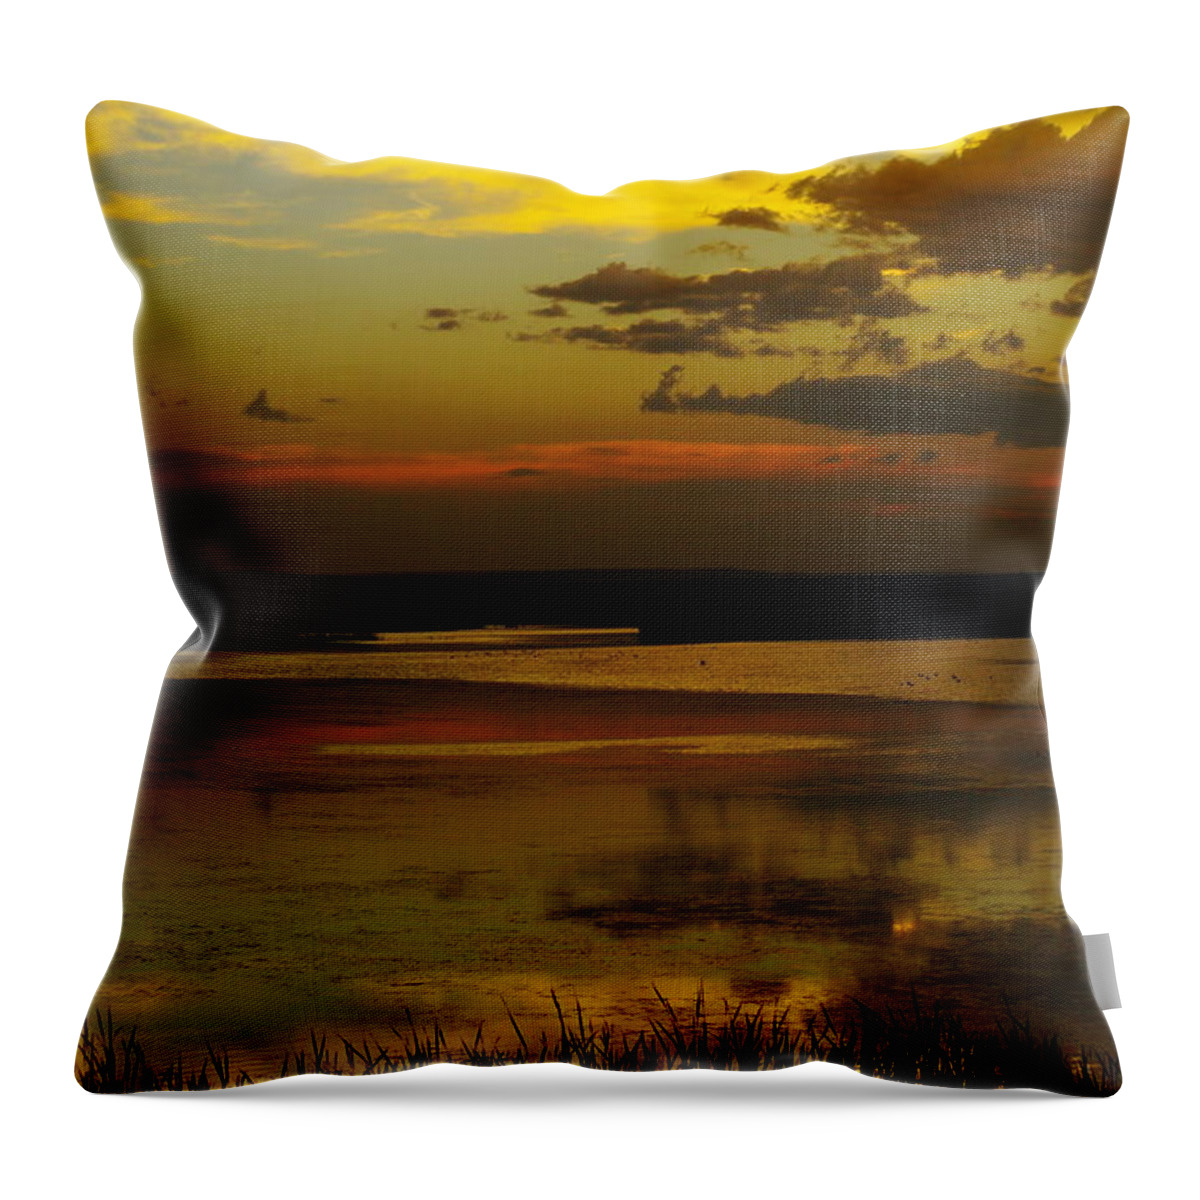 Lakes Throw Pillow featuring the photograph Sunset On Medicine Lake by Jeff Swan